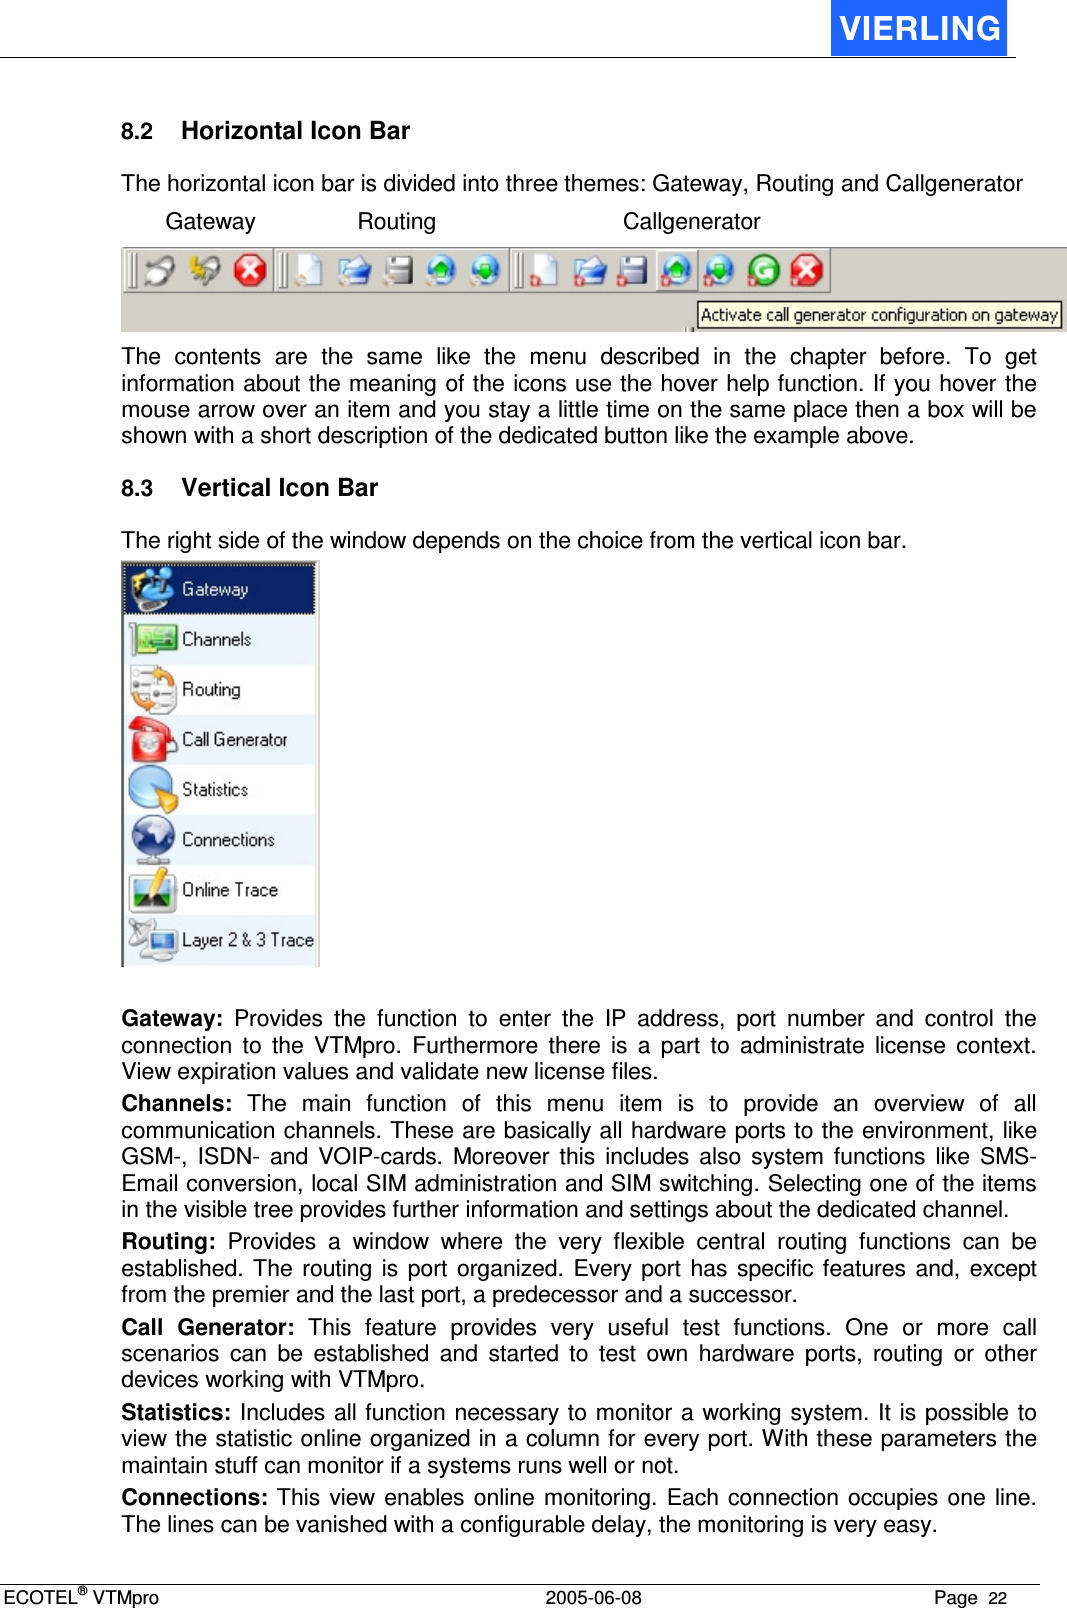 ECOTEL® VTMpro  2005-06-08 Page  22    8.2 Horizontal Icon Bar The horizontal icon bar is divided into three themes: Gateway, Routing and Callgenerator   Gateway  Routing  Callgenerator  The  contents  are  the  same  like  the  menu  described  in  the  chapter  before.  To  get information about the meaning of the icons use the hover help function. If you hover the mouse arrow over an item and you stay a little time on the same place then a box will be shown with a short description of the dedicated button like the example above. 8.3 Vertical Icon Bar The right side of the window depends on the choice from the vertical icon bar.   Gateway:  Provides  the  function  to  enter  the  IP  address,  port  number  and  control  the connection  to  the  VTMpro.  Furthermore  there  is  a  part  to  administrate  license  context. View expiration values and validate new license files. Channels:  The  main  function  of  this  menu  item  is  to  provide  an  overview  of  all communication channels. These are basically all hardware ports to the environment, like GSM-,  ISDN-  and  VOIP-cards.  Moreover  this  includes  also  system  functions  like  SMS-Email conversion, local SIM administration and SIM switching. Selecting one of the items in the visible tree provides further information and settings about the dedicated channel. Routing:  Provides  a  window  where  the  very  flexible  central  routing  functions  can  be established. The routing  is  port  organized.  Every  port  has  specific  features  and,  except from the premier and the last port, a predecessor and a successor. Call  Generator:  This  feature  provides  very  useful  test  functions.  One  or  more  call scenarios  can  be  established  and  started  to  test  own  hardware  ports,  routing  or  other devices working with VTMpro. Statistics: Includes all function necessary to monitor a working system. It is possible to view the statistic online organized in a column for every port. With these parameters the maintain stuff can monitor if a systems runs well or not. Connections: This view enables online  monitoring.  Each connection occupies one  line. The lines can be vanished with a configurable delay, the monitoring is very easy. 